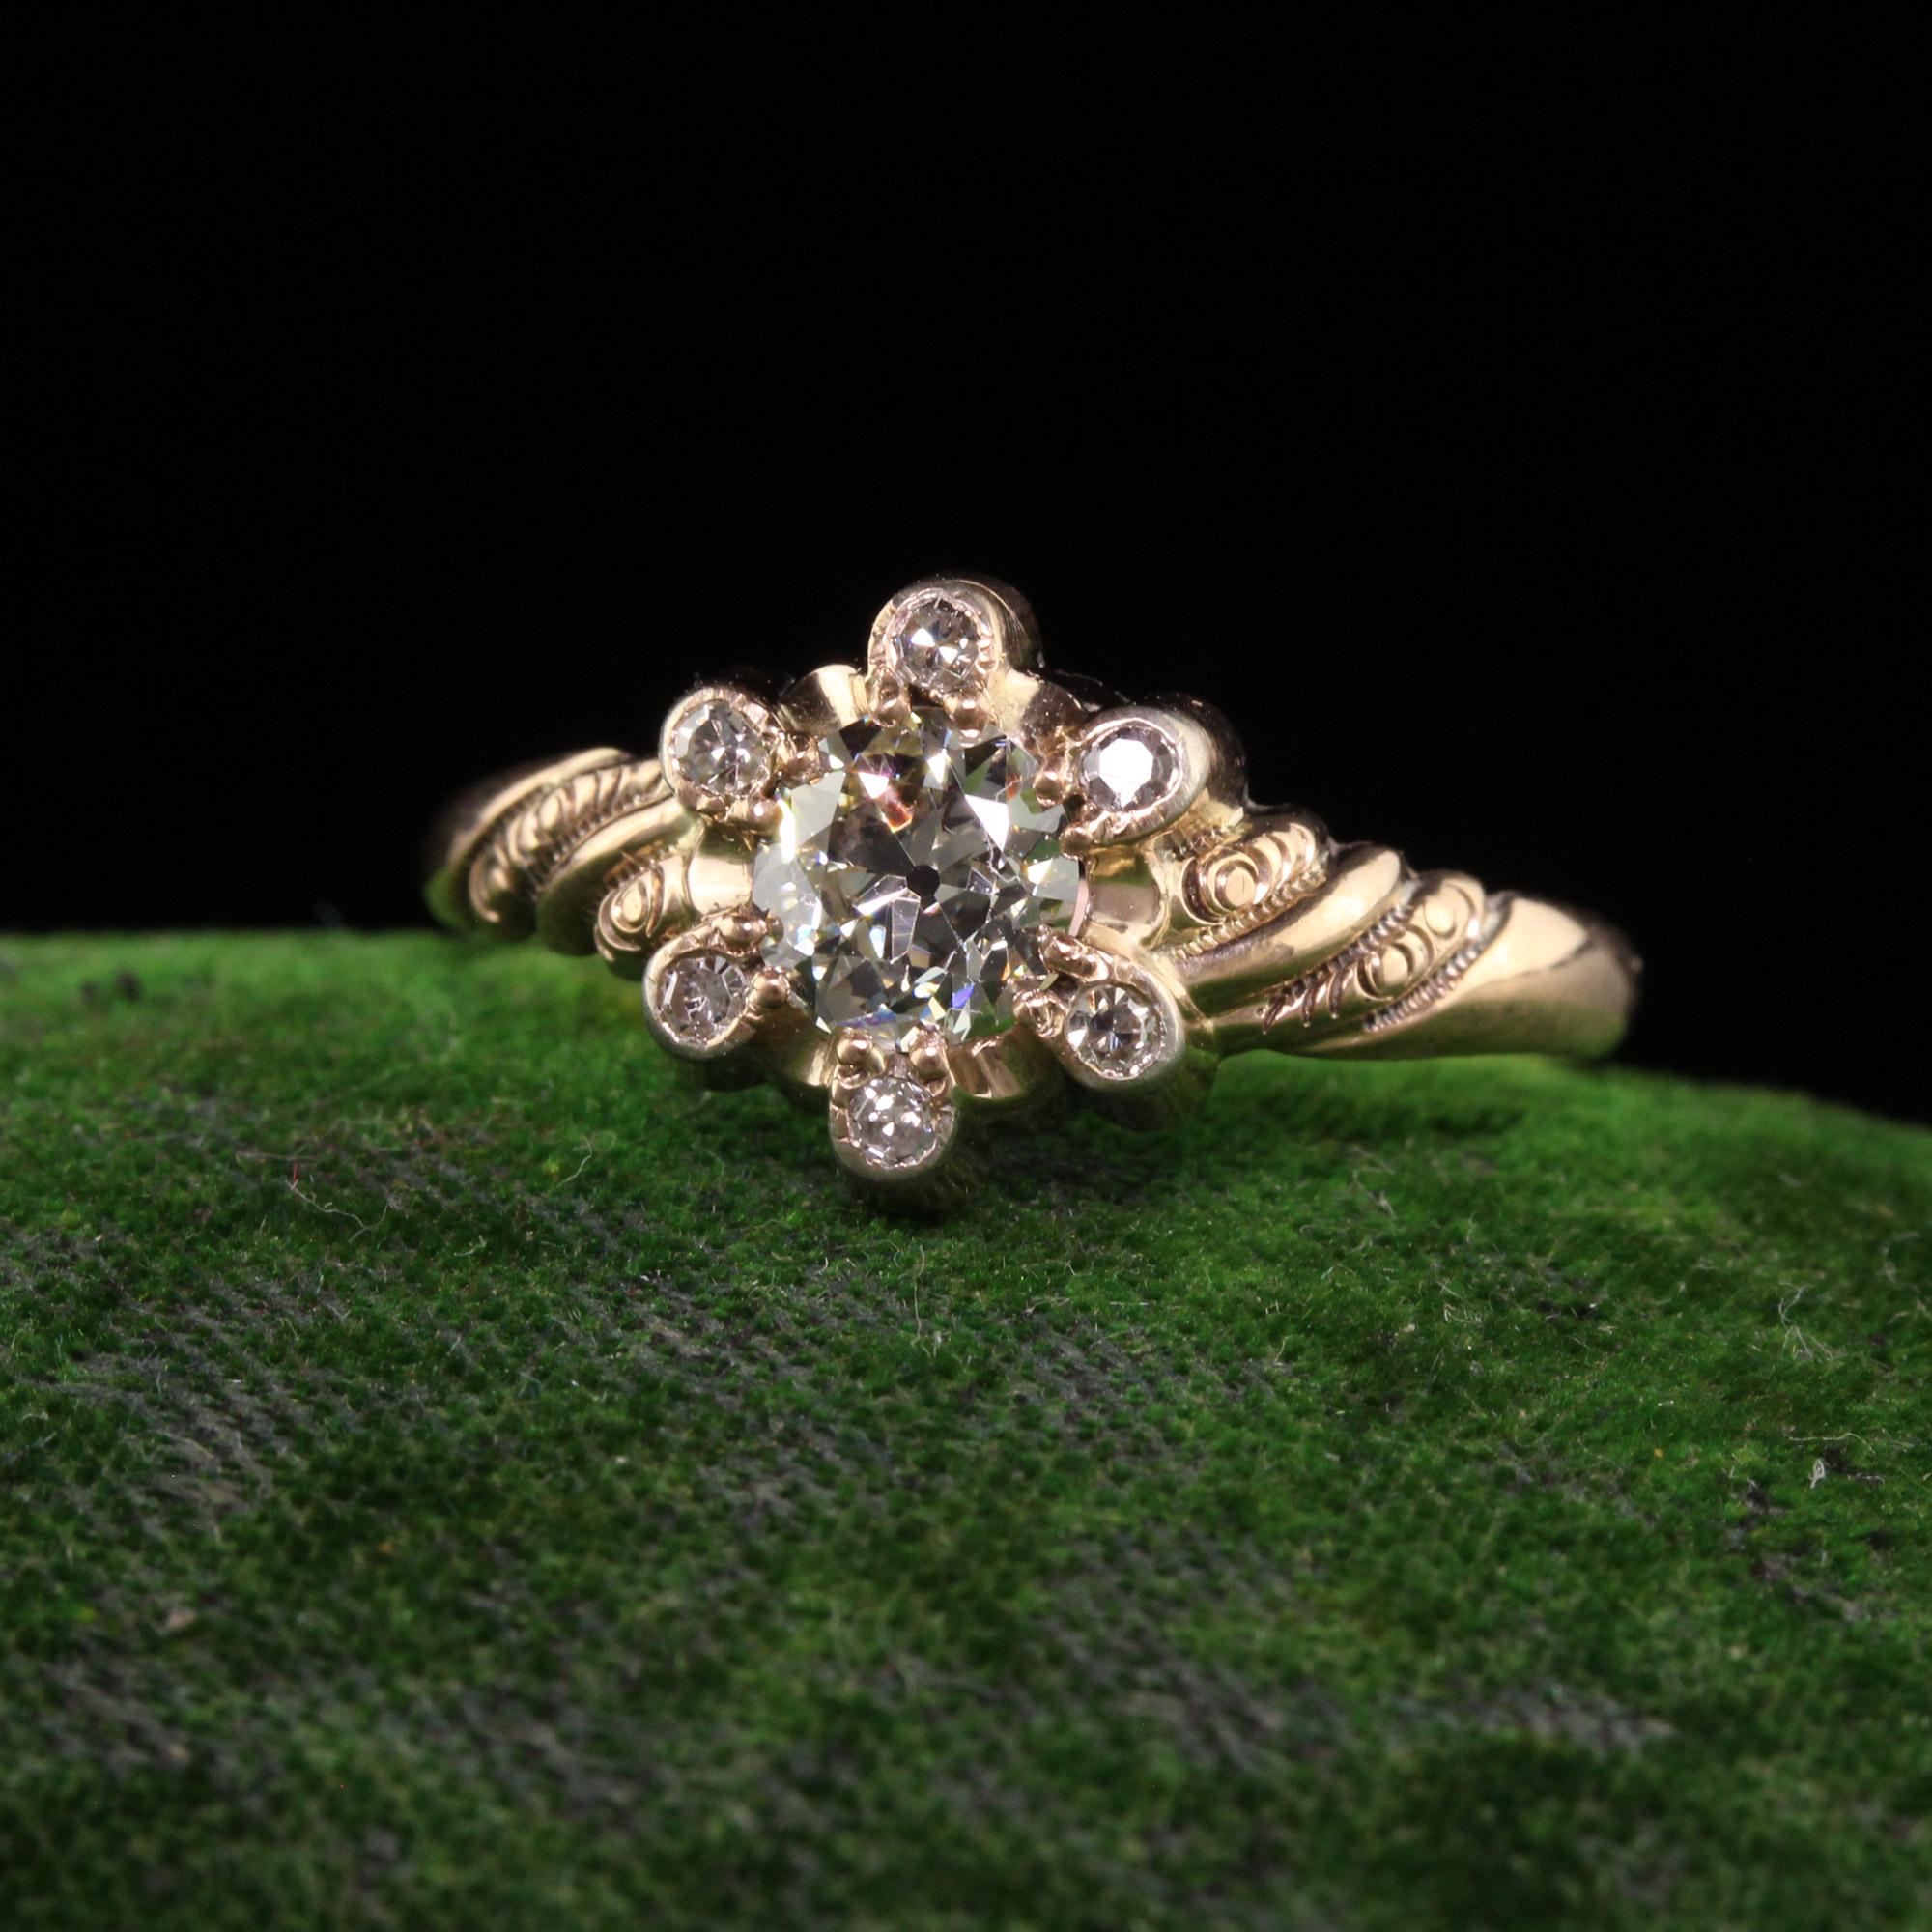 Beautiful Antique Victorian 14K Yellow Gold Old European Diamond Engagement Ring. This beautiful ring is crafted in 14k yellow gold. The ring holds a beautiful old european cut diamond in the center and is surrounded by old cut diamonds. The ring is